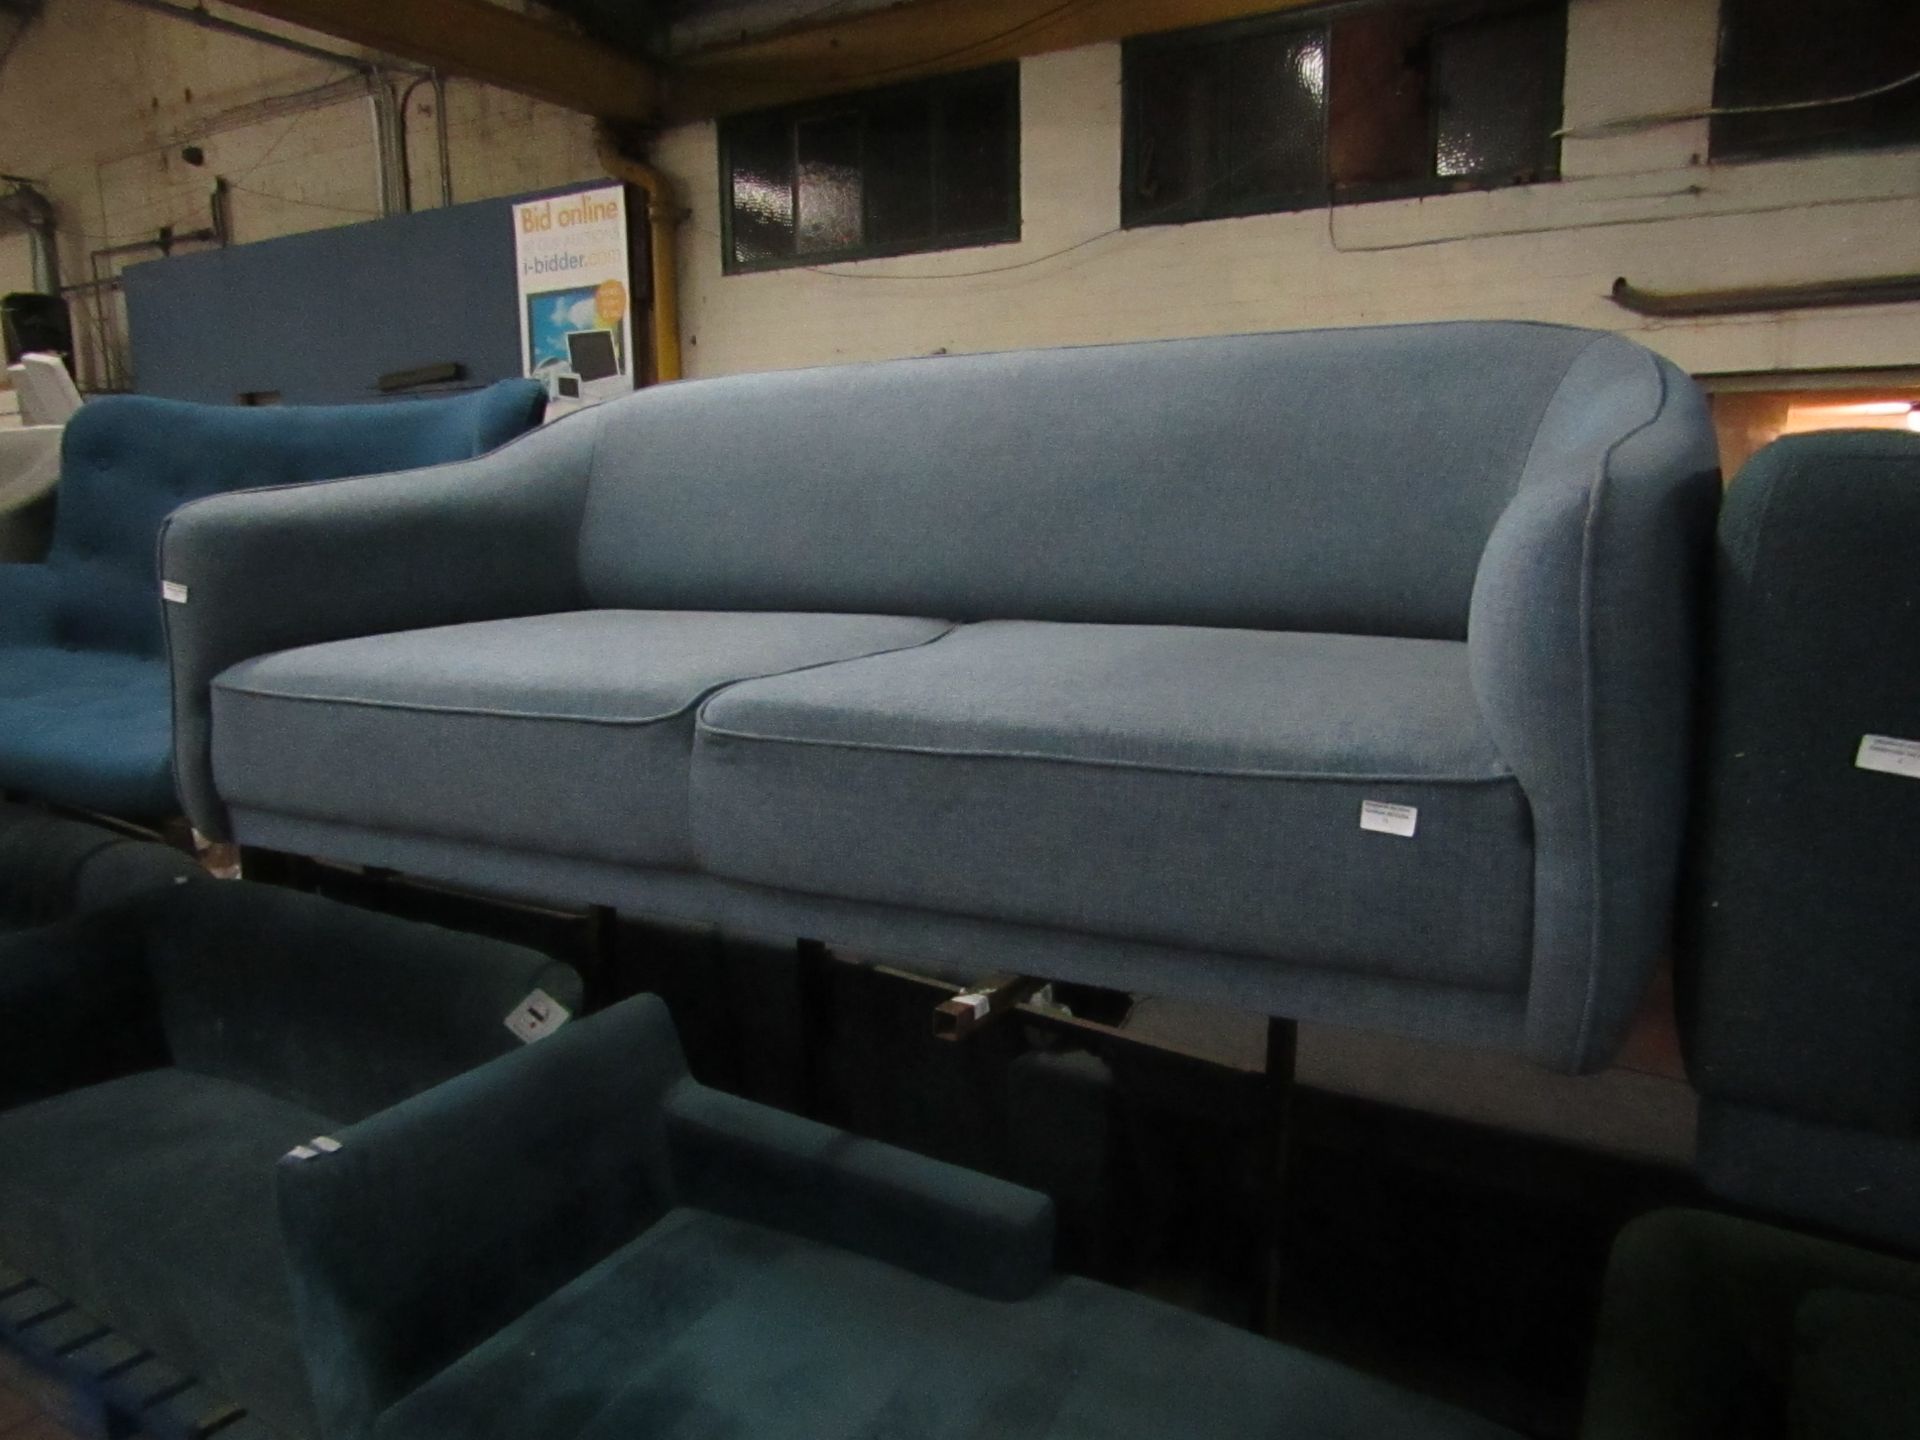 | 1X | MADE.COM 3 SEATER TUBBY SOFA | (PLEASE NOTE, THIS DOES NOT PROVIDE ANY WARRANTY OR